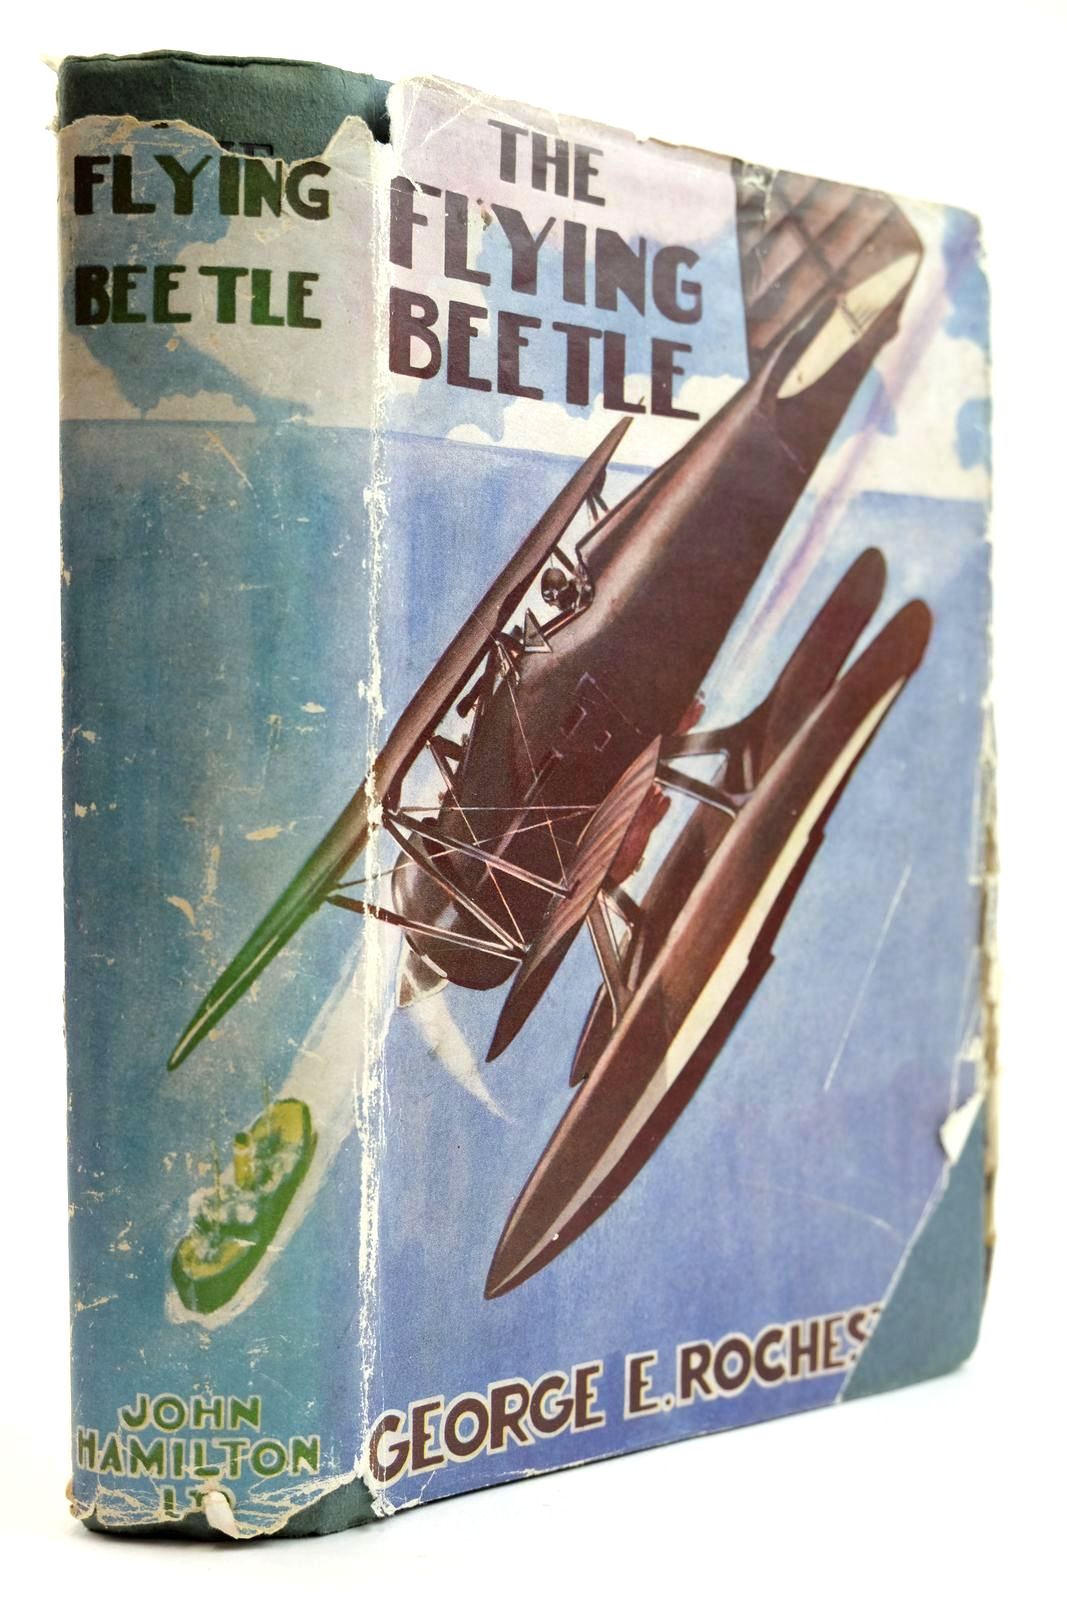 Photo of THE FLYING BEETLE written by Rochester, George E. illustrated by Bradshaw, Stanley Orton published by John Hamilton Ltd. (STOCK CODE: 2132014)  for sale by Stella & Rose's Books